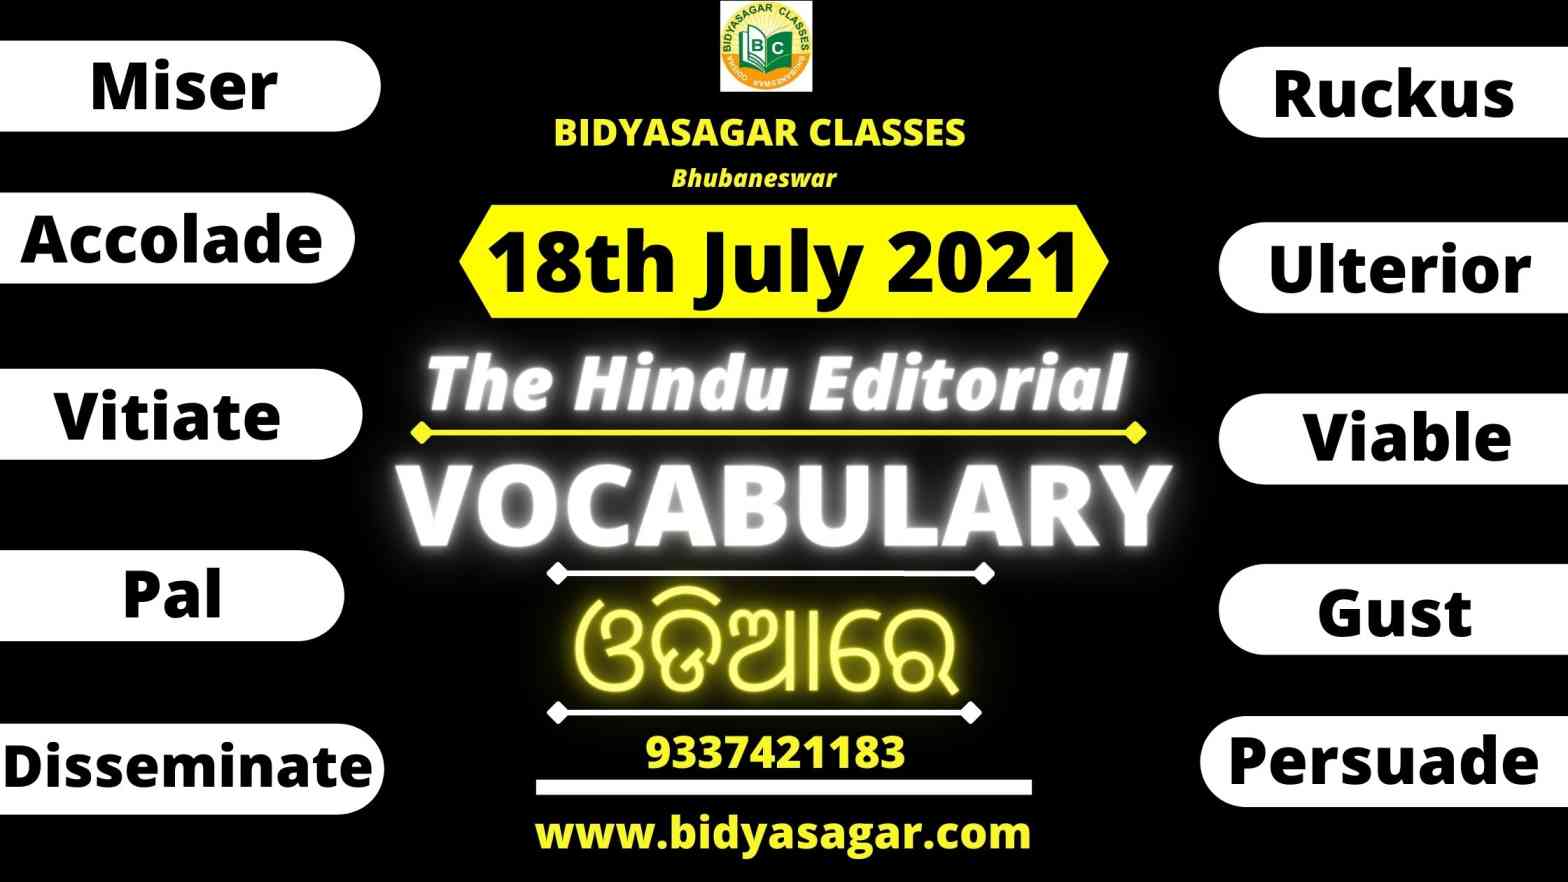 The Hindu Editorial Vocabulary of 18th July 2021